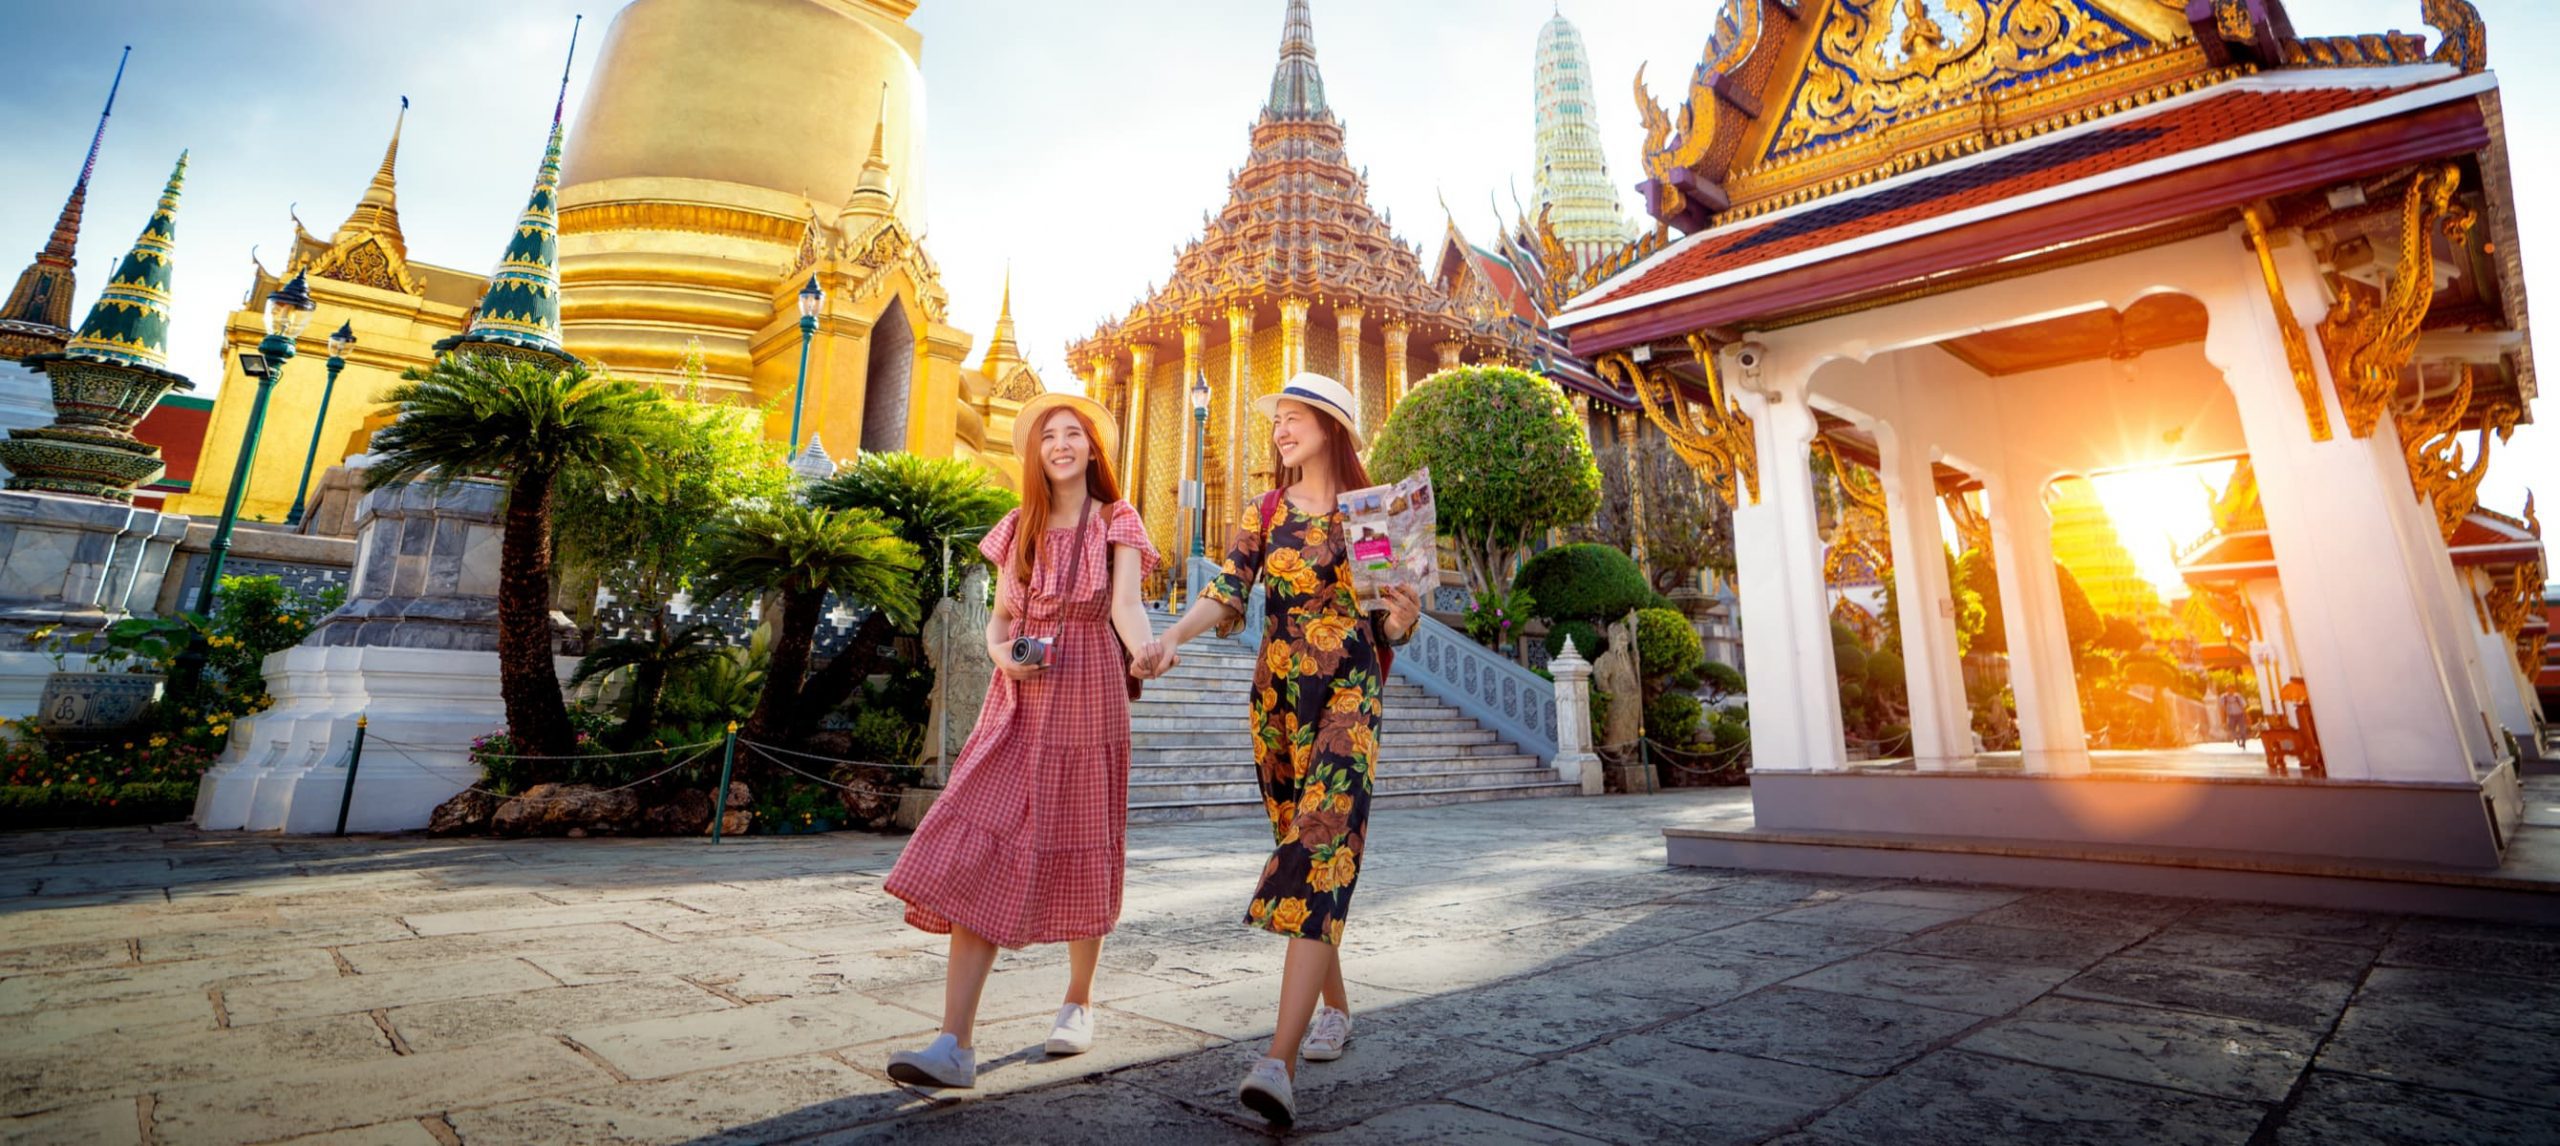 Two young woman walking together in front of a temple in Bangkok, Thailand.